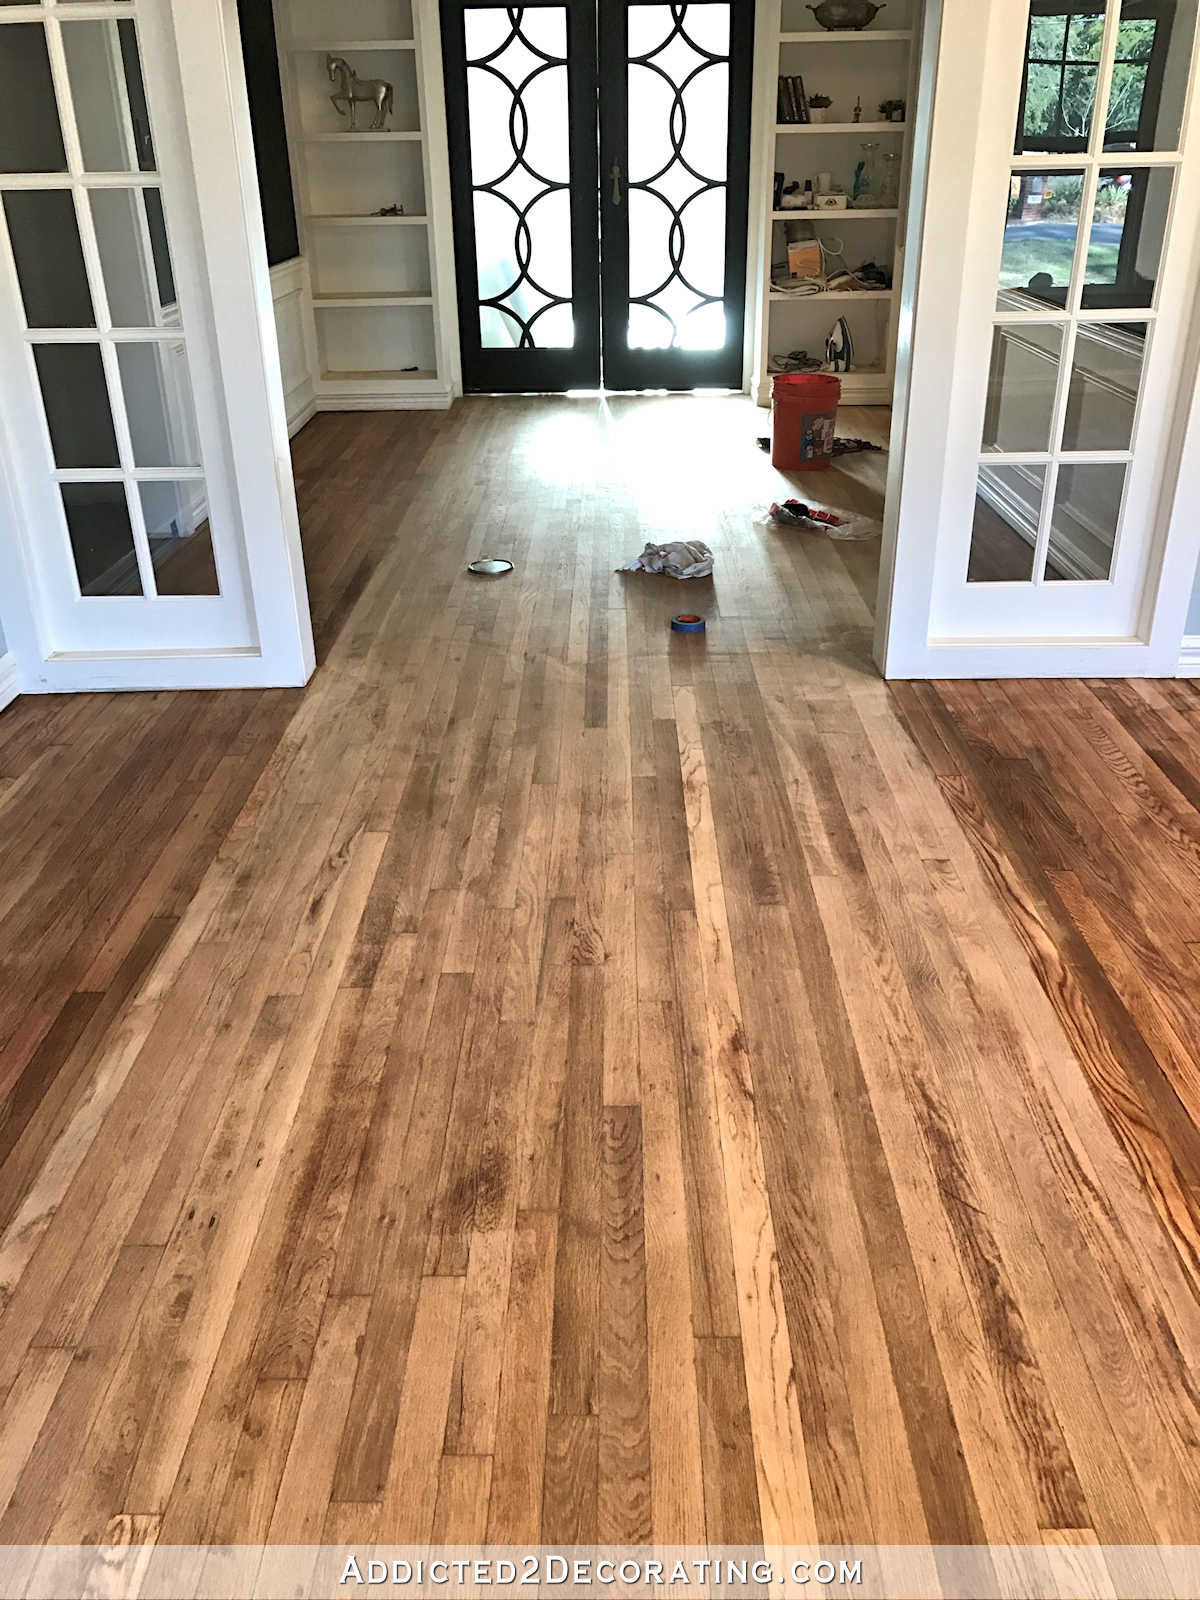 15 Lovable Cost to Refinish Hardwood Floors Per Sq Ft 2022 free download cost to refinish hardwood floors per sq ft of how much to refinish wood floors adventures in staining my red oak with regard to how much to refinish wood floors adventures in staining my red